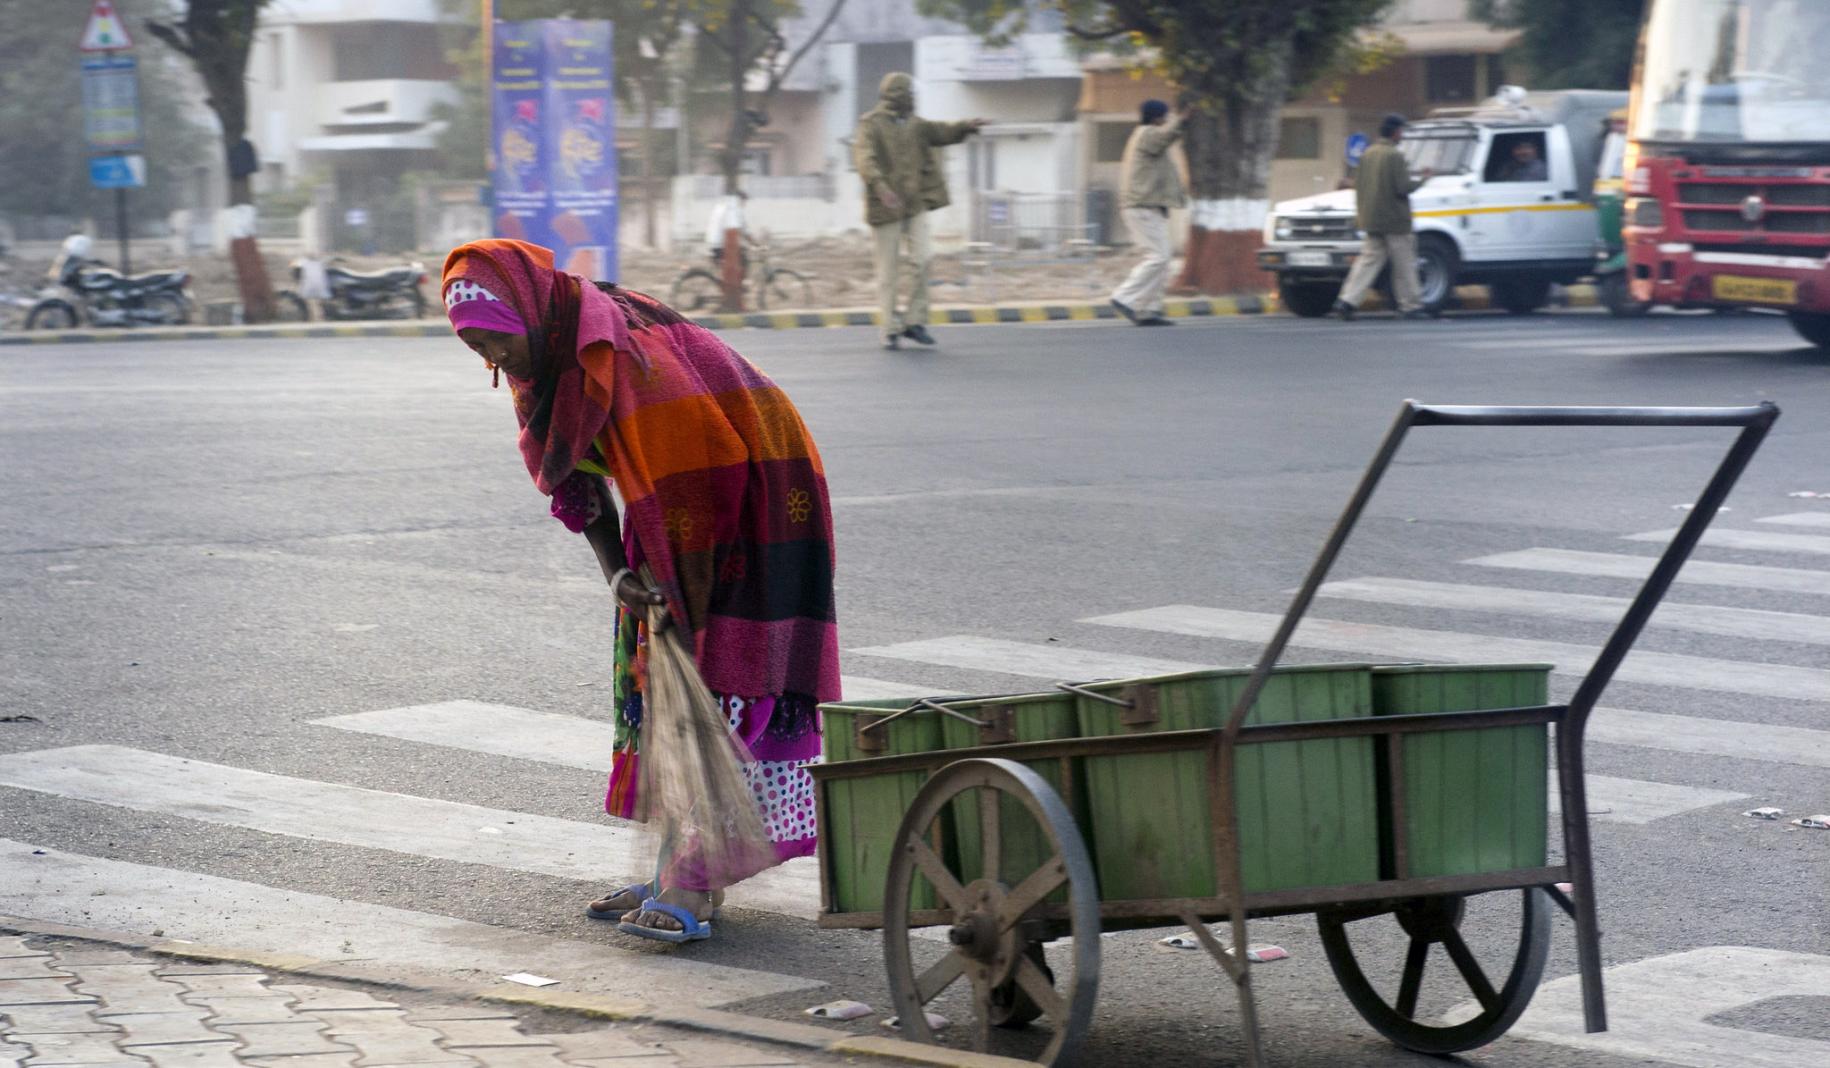 Woman is shown sweeping the street near a cart on the road.